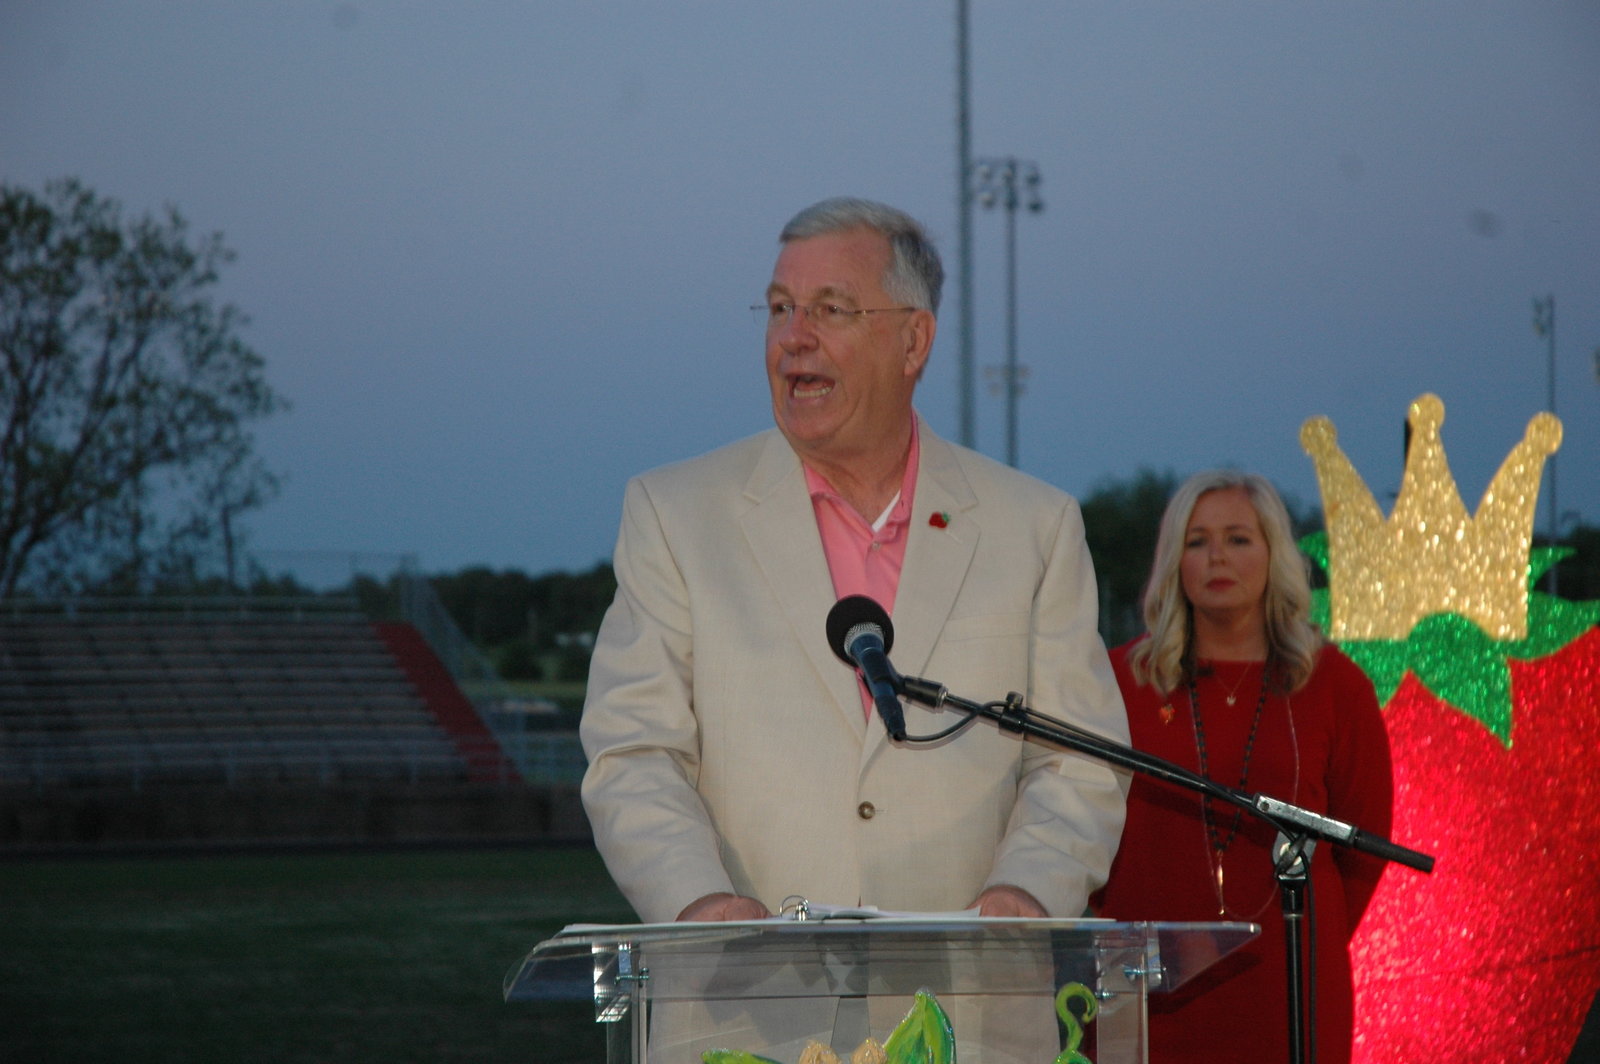 West Tennessee Strawberry Festival - Opening Ceremonies - 5